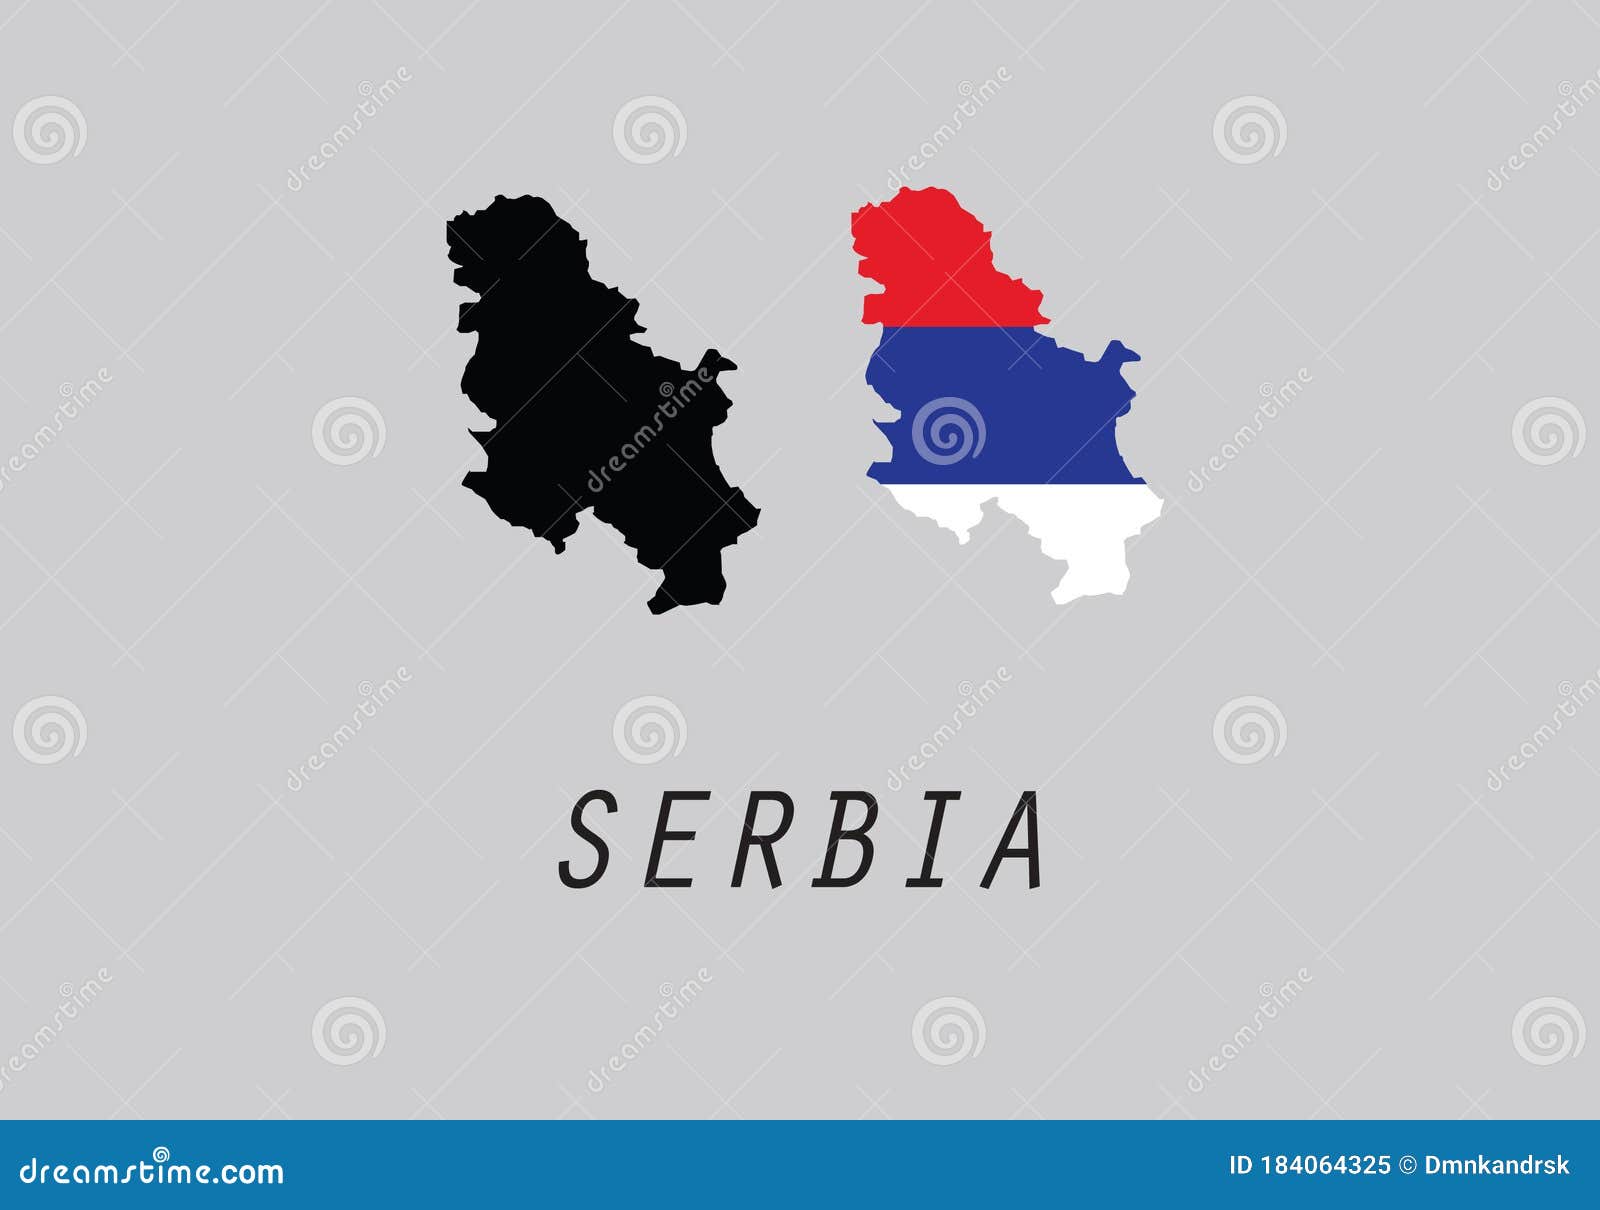 Serbia Outline Map National Borders Stock Vector - Illustration of ...